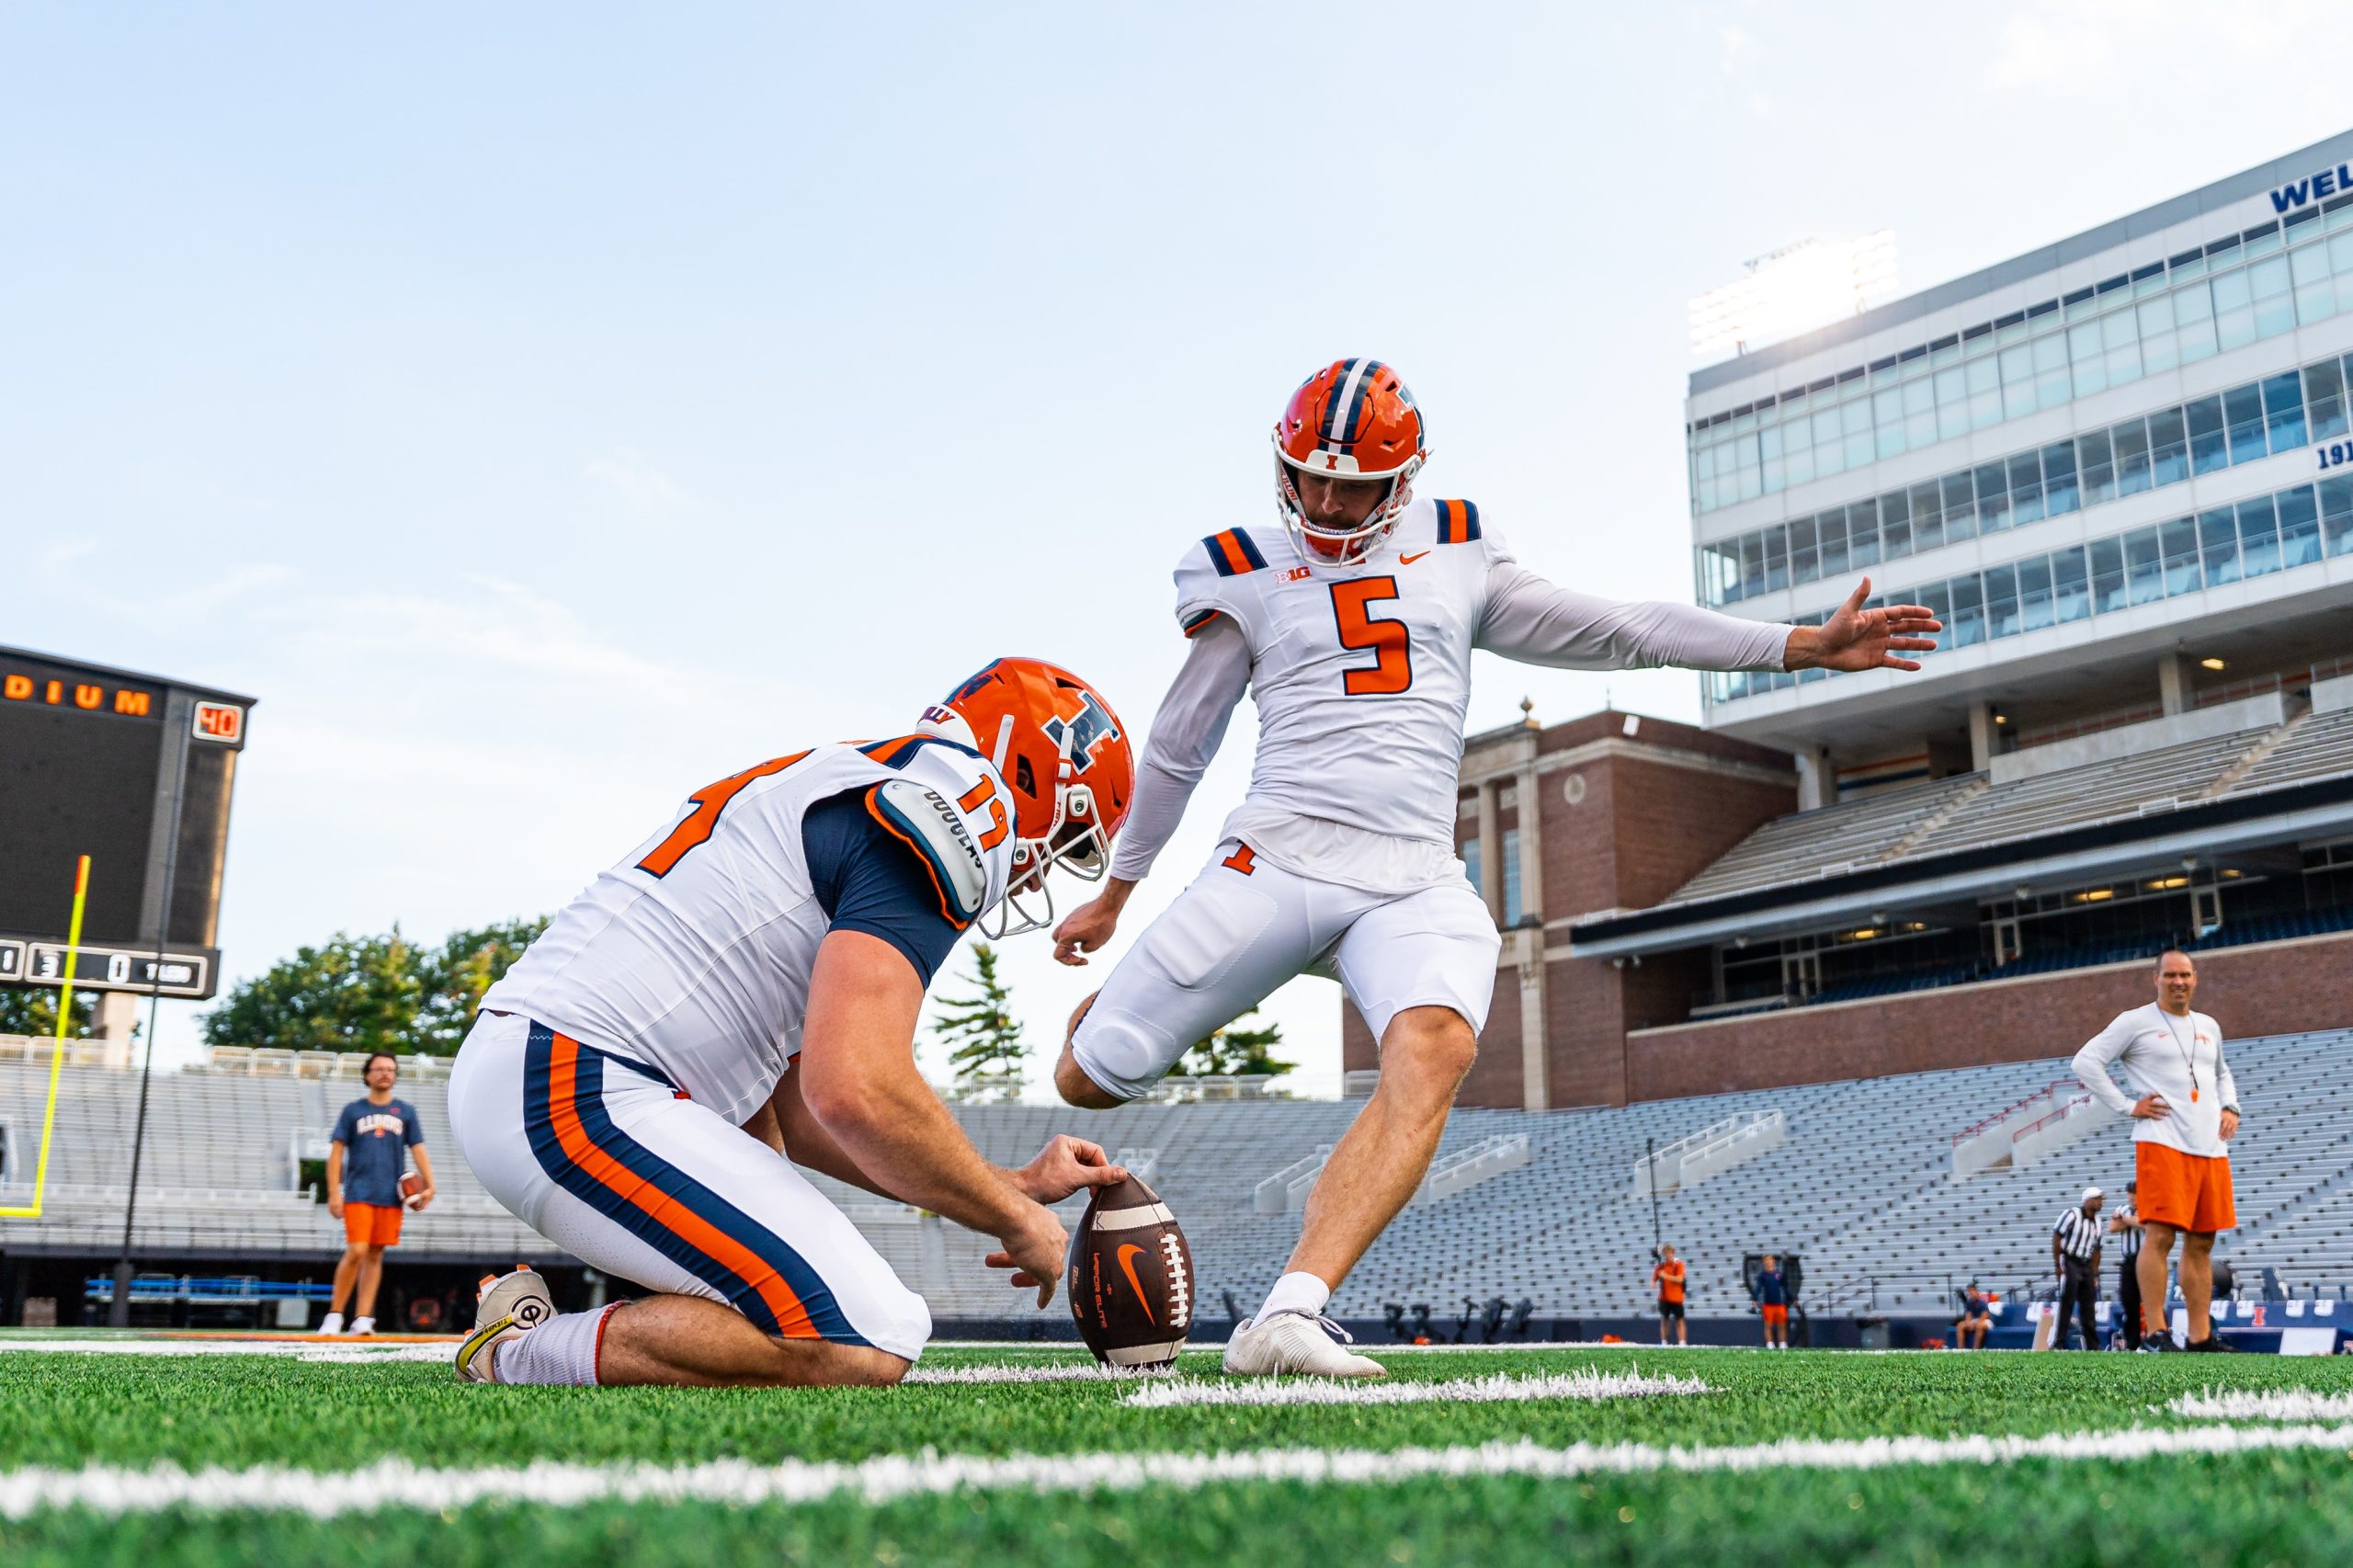 Caleb Griffin Given Opportunity at Kicking Triple Crown in Final Year at Illinois